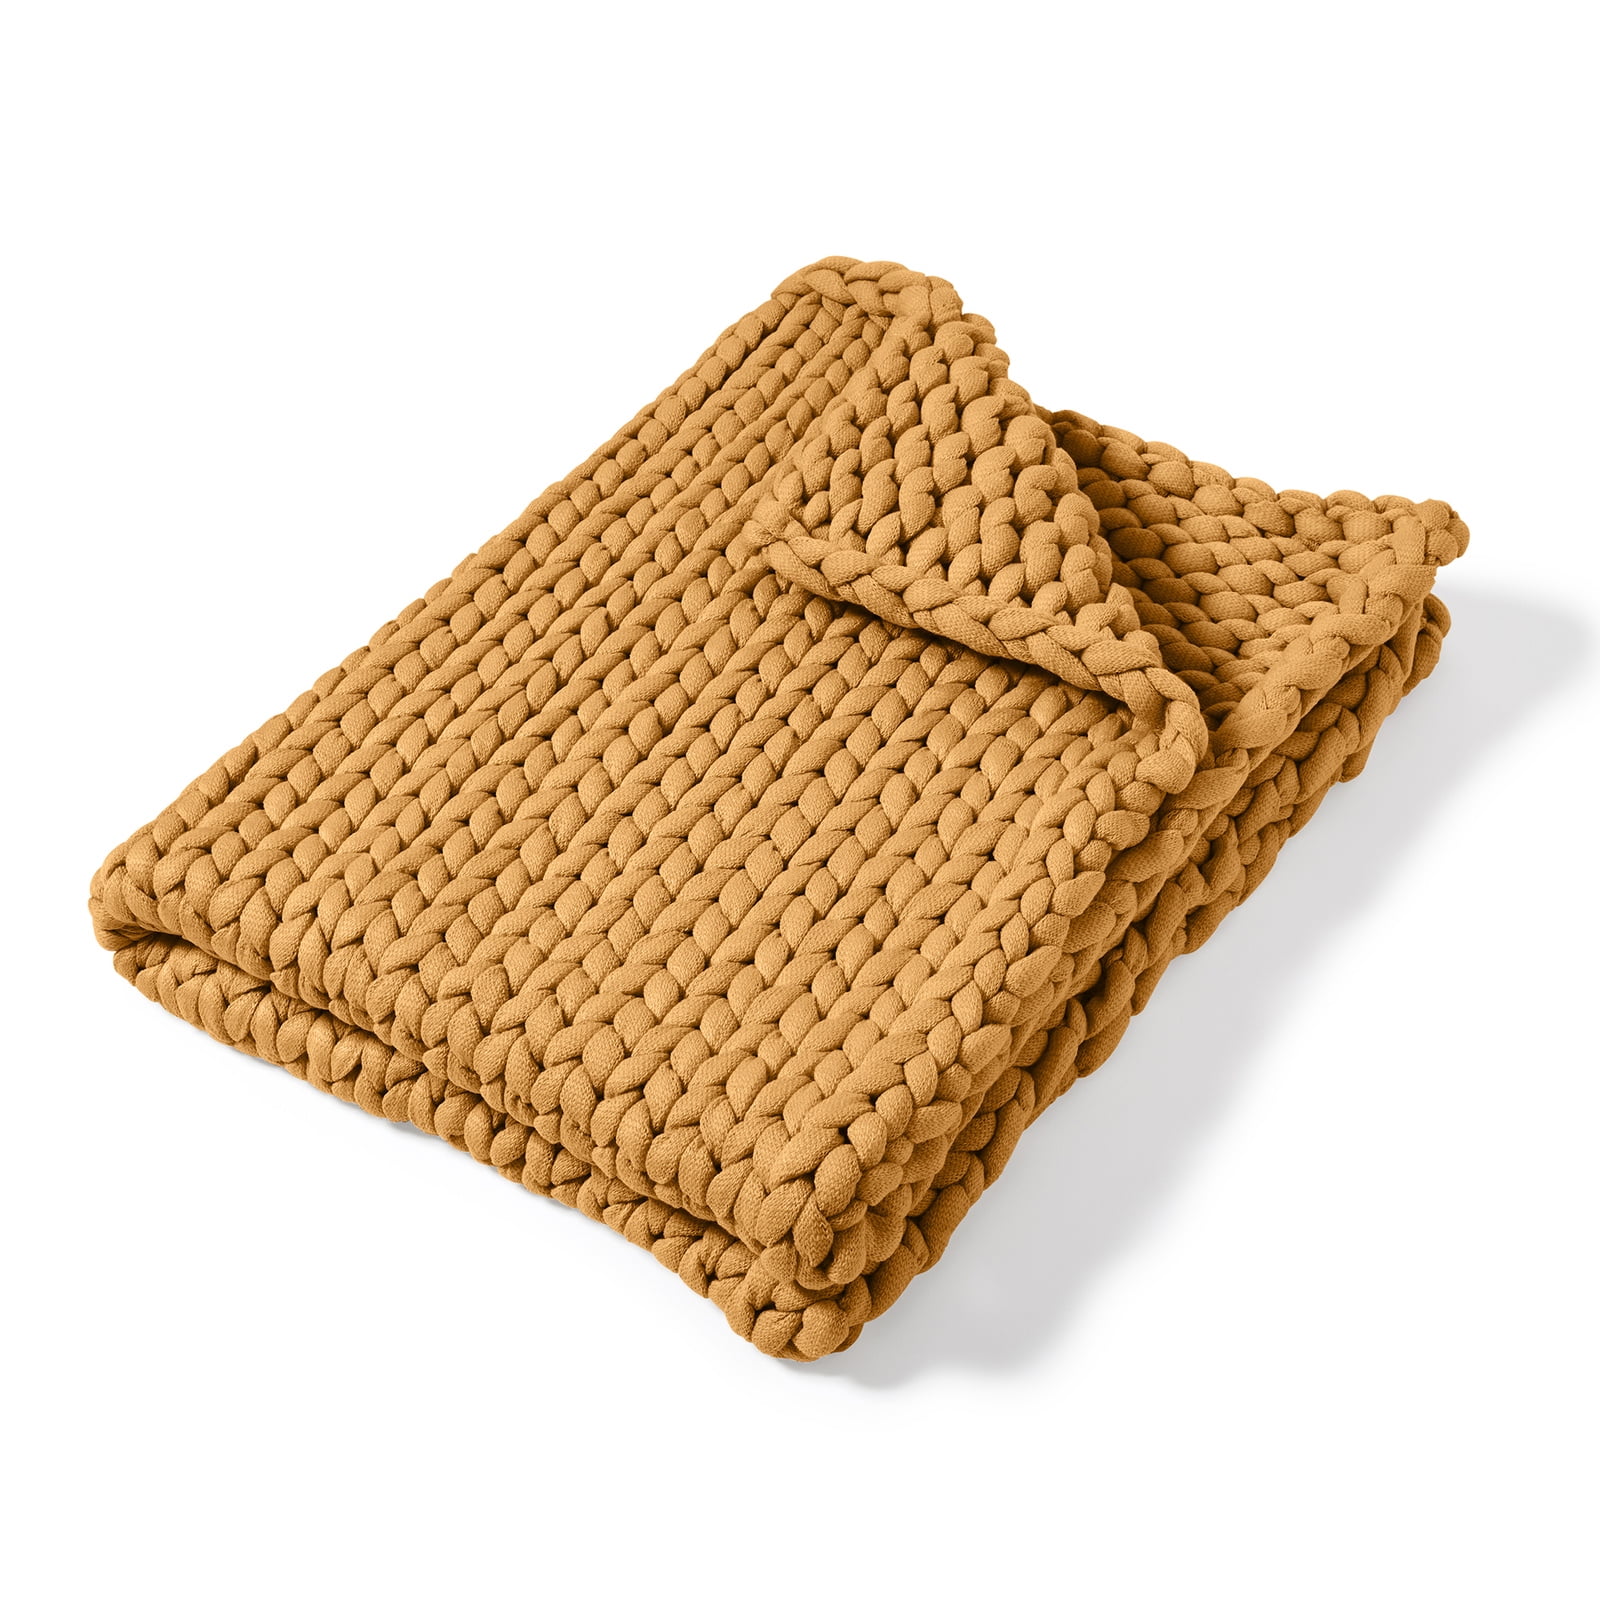 70009 40 X 50 In. Chunky Knit Throw, Camel